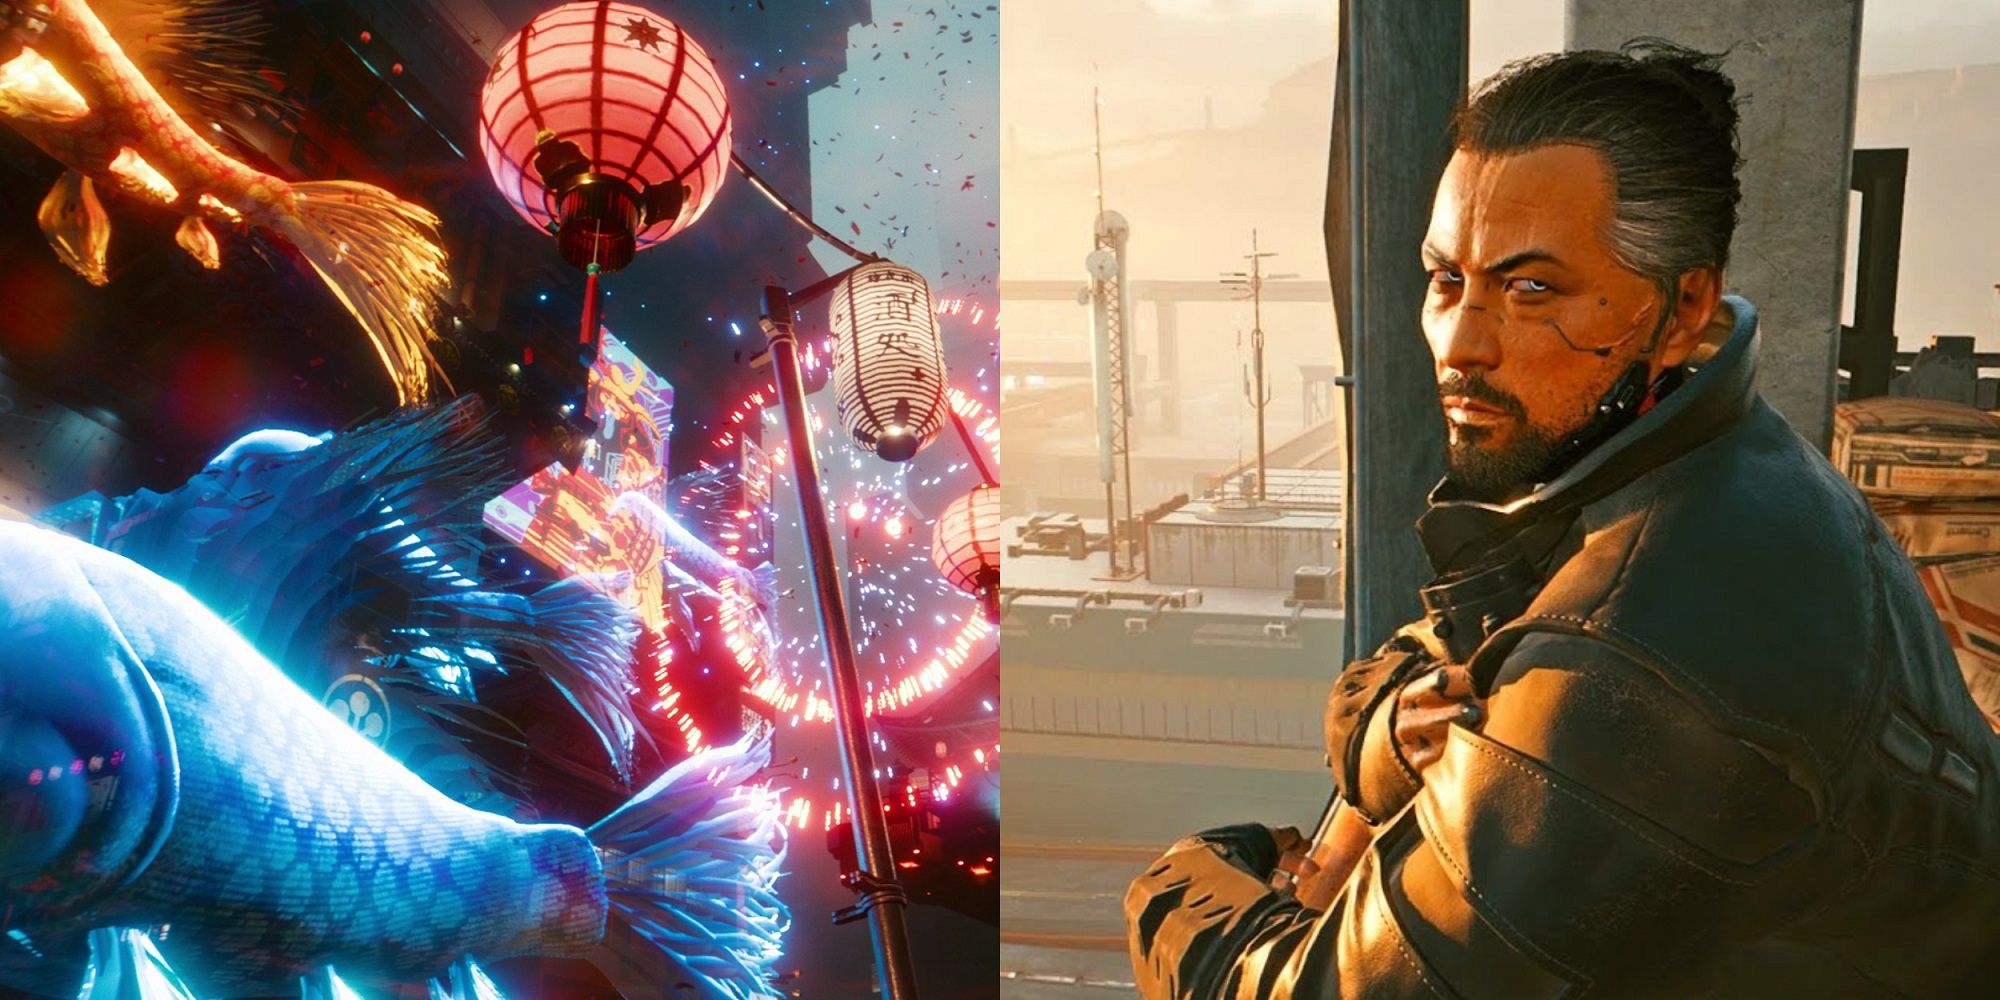 Cyberpunk 2077 Dev Says One Conversation With Takemura Took More Work Than The Whole Parade Section